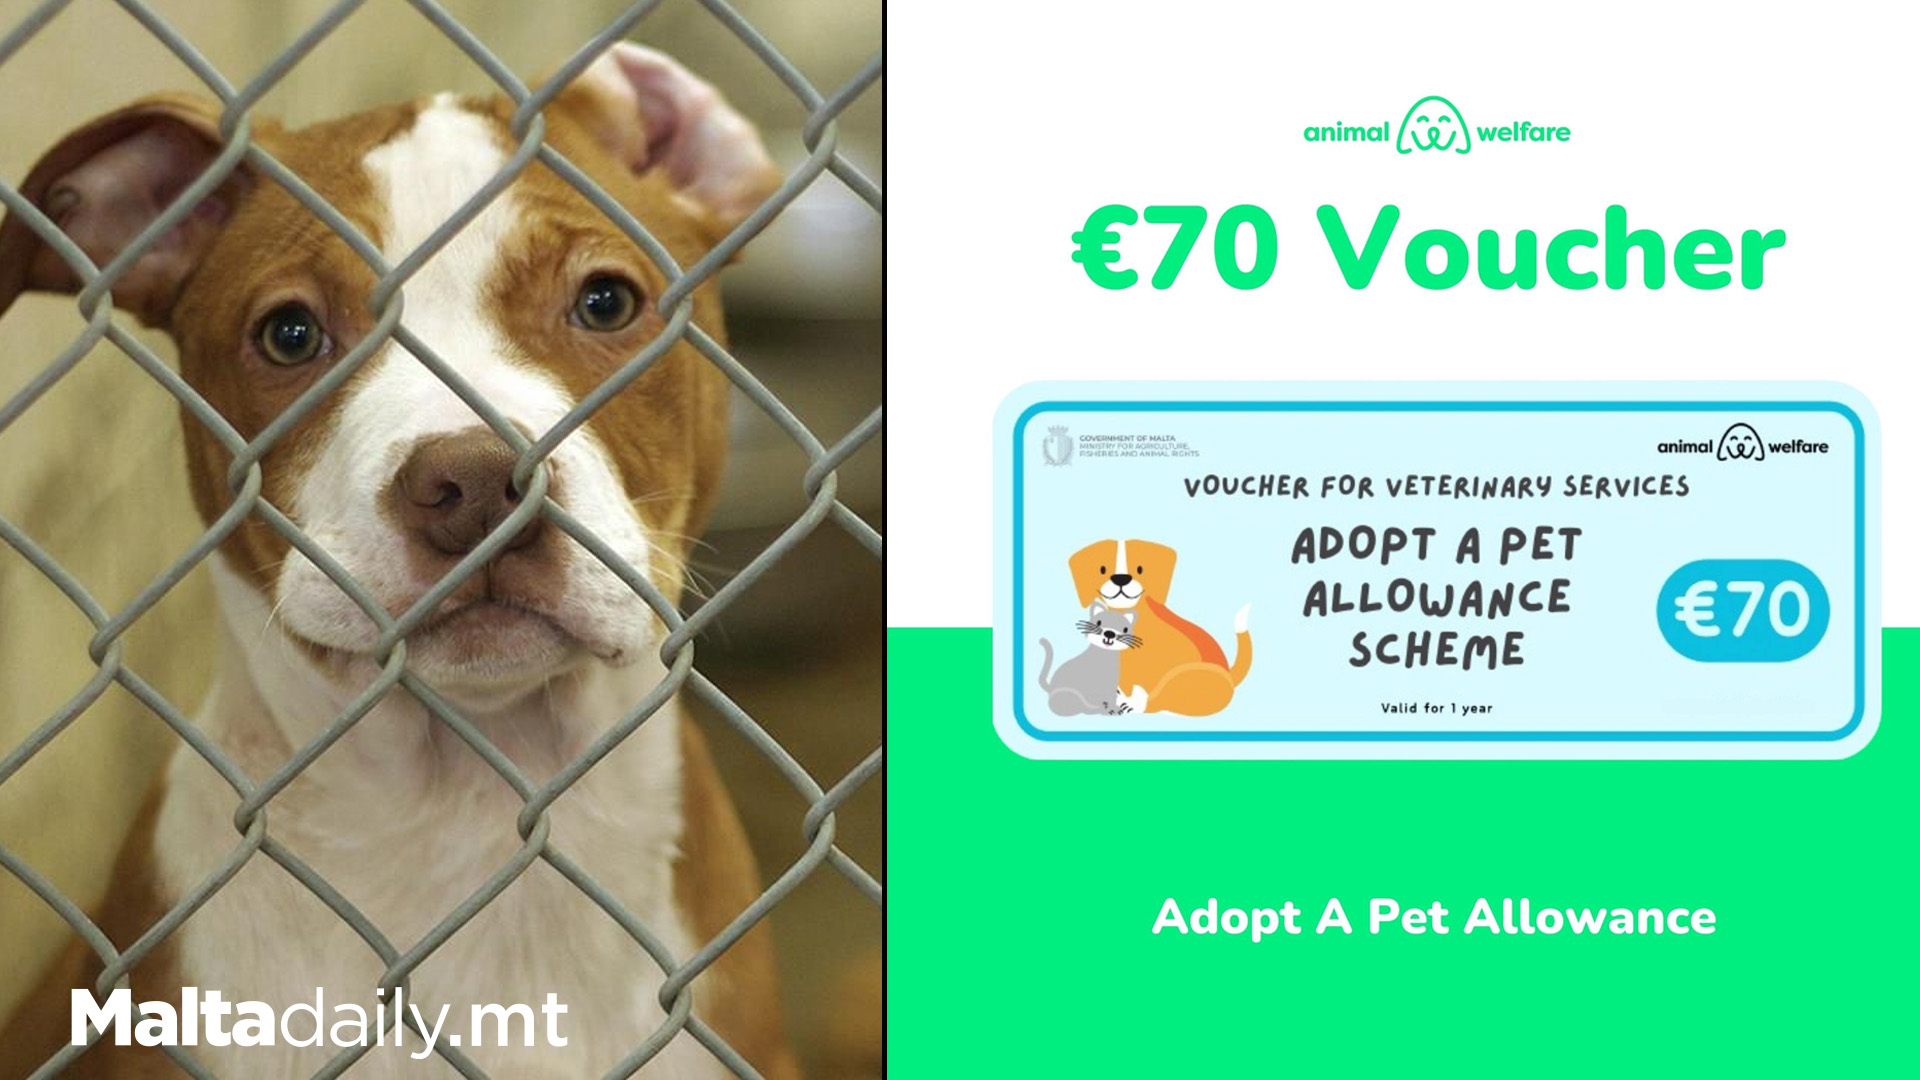 €70 Vouchers To Encourage People To Adopt More Animals